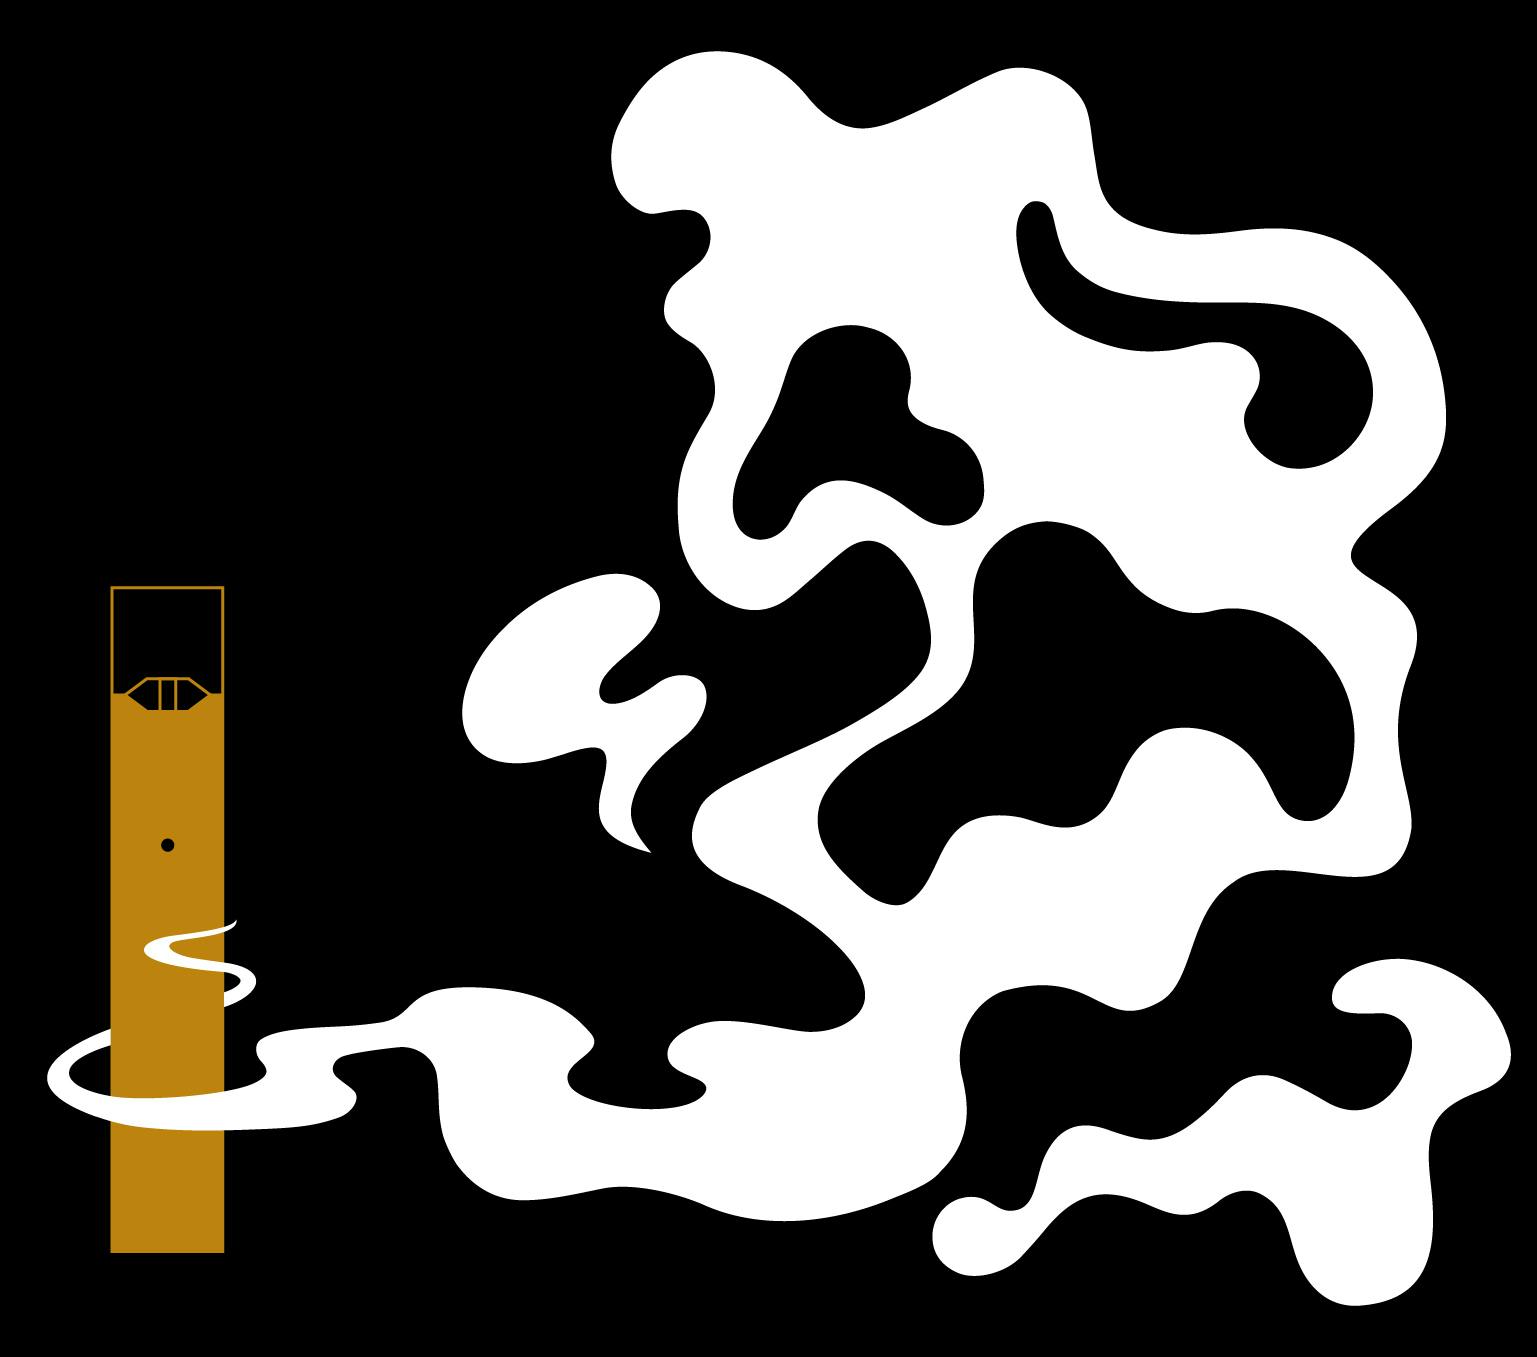 An illustration of a gold e-cigarette on the left against the black background. White 'smoke' coming from the e-cigarette makes the outline of a ghost-like creature showing two eyes and a mouth.